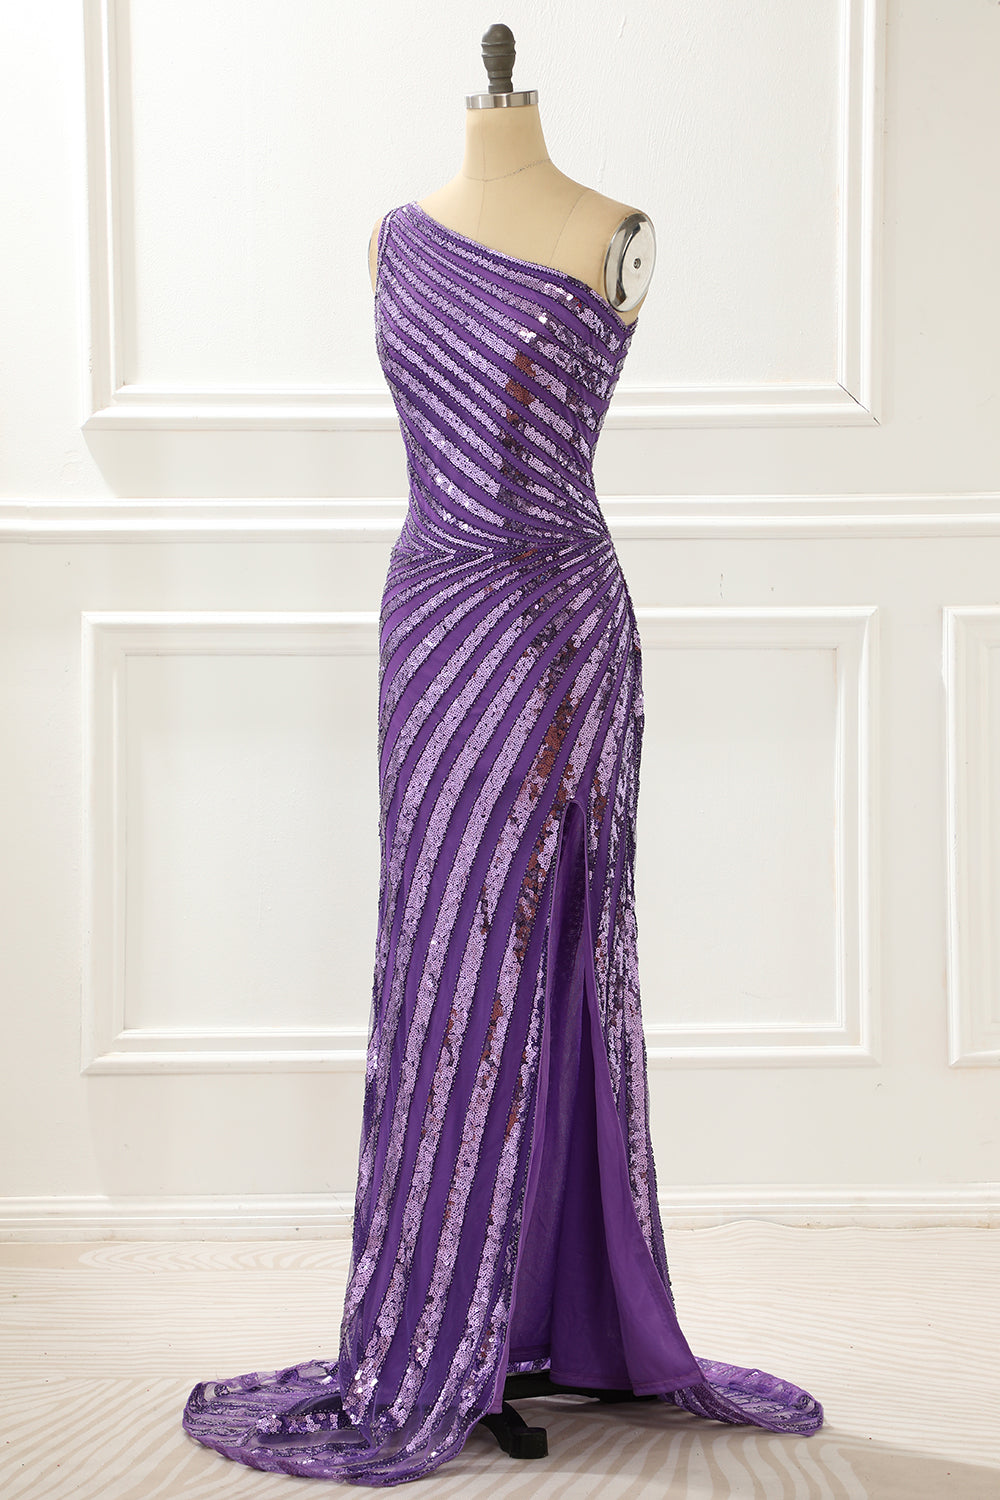 Formal Dress To Attend Wedding, One Shoulder Purple Sequin Prom Dress with Slit